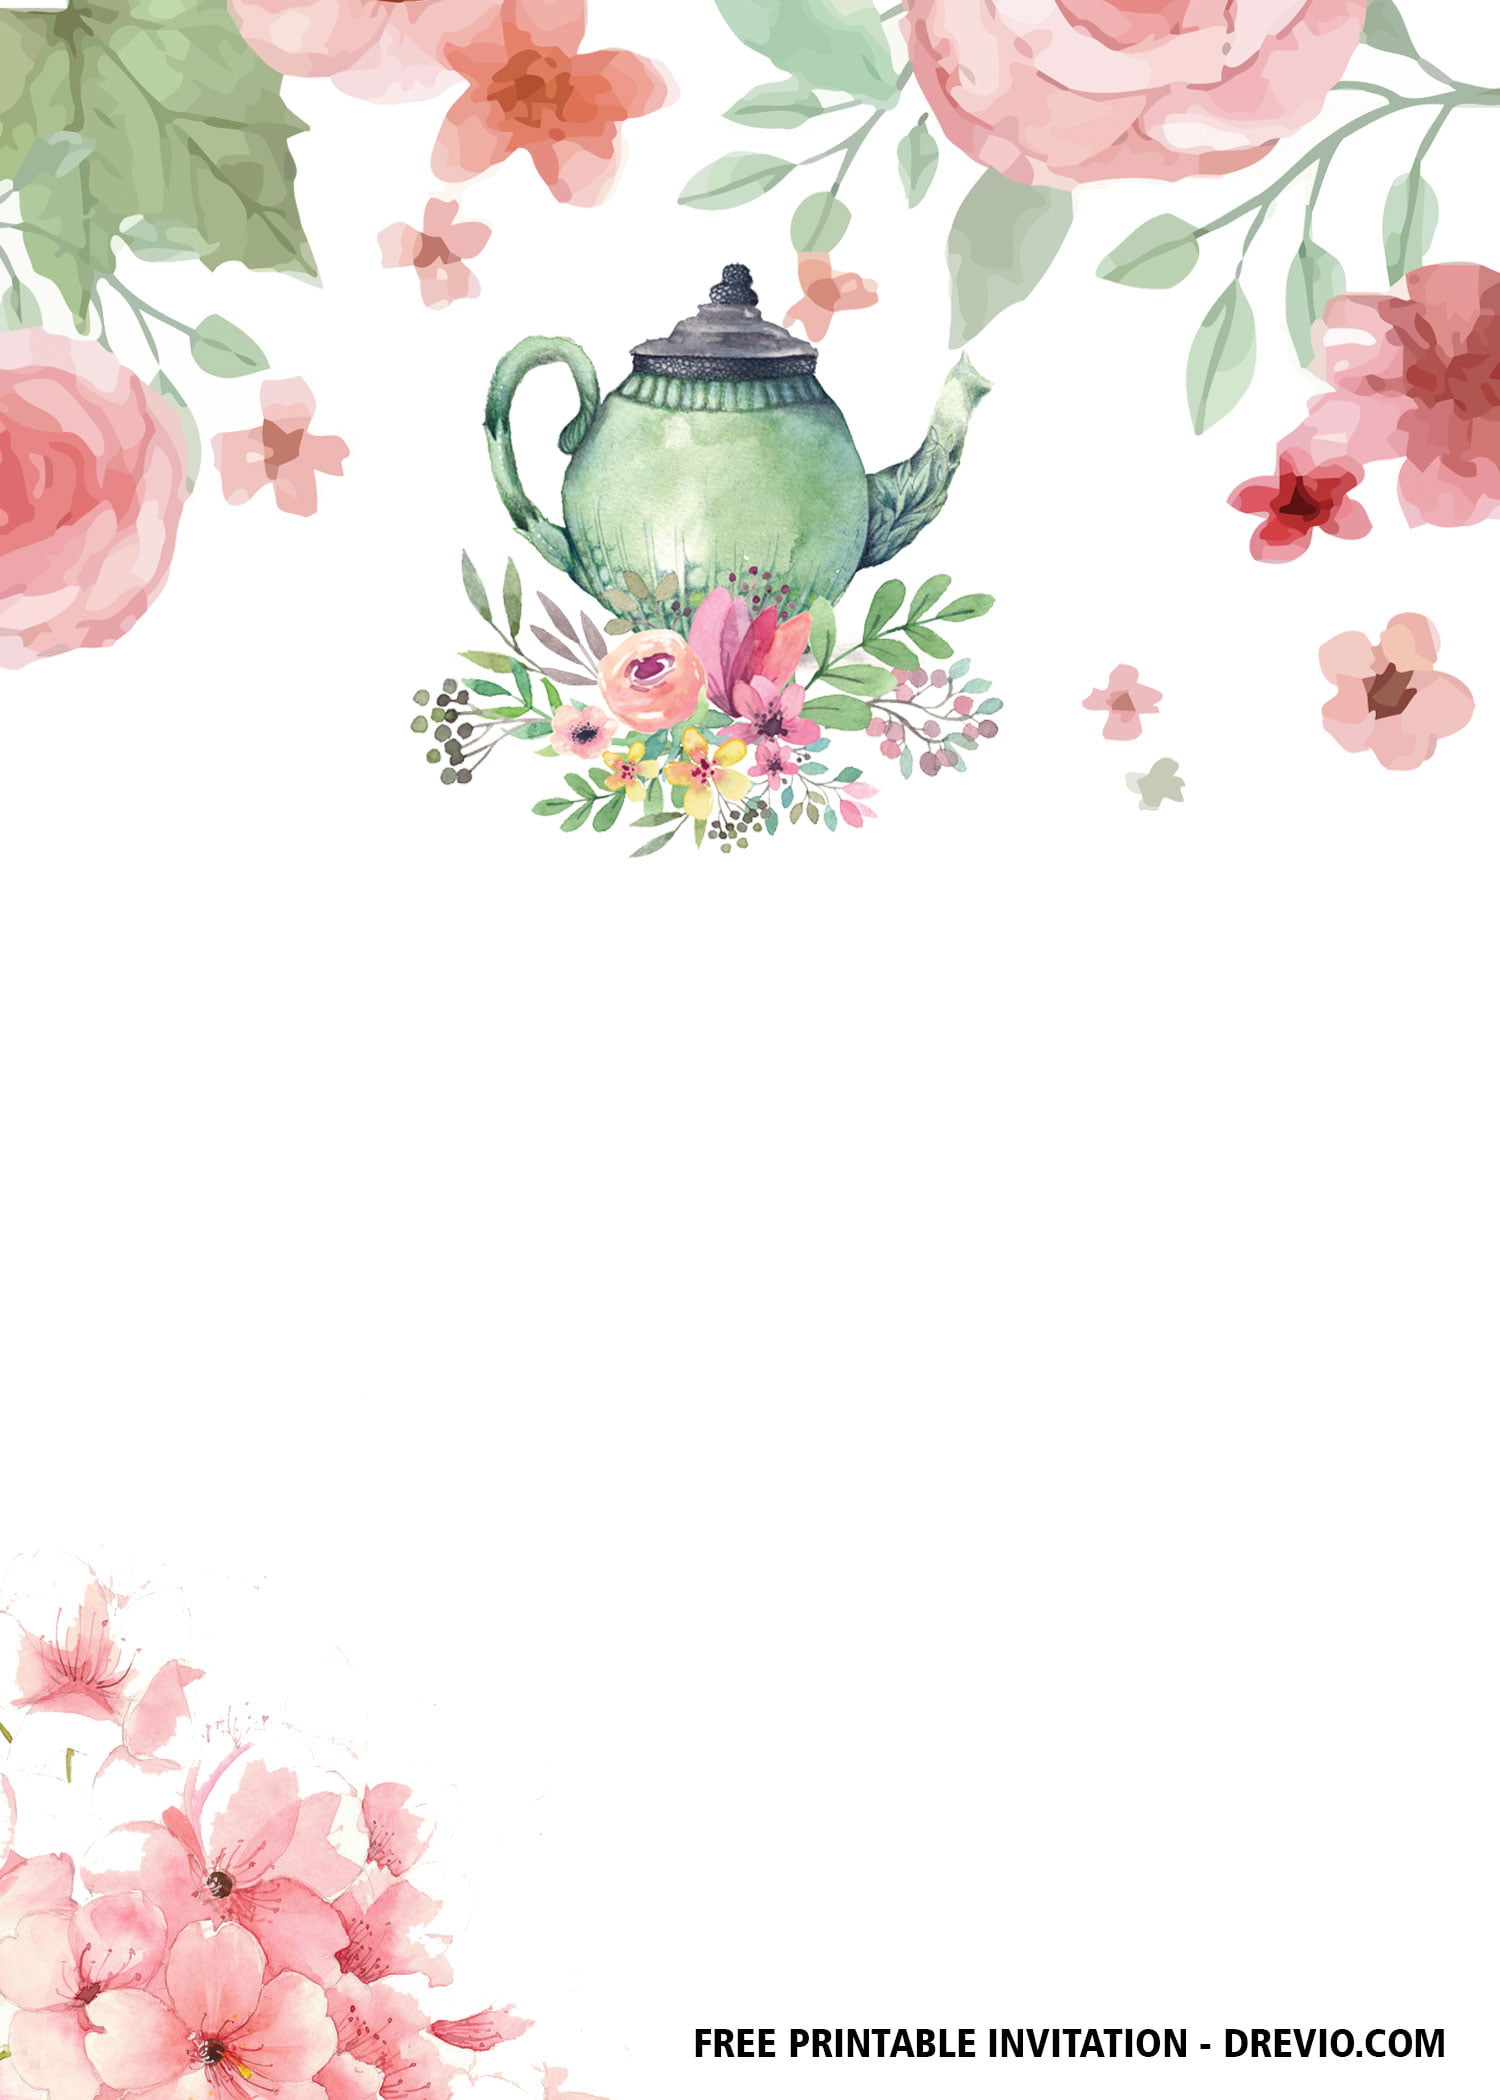 FREE Floral Tea Party Invitation Templates Download Hundreds FREE PRINTABLE Birthday